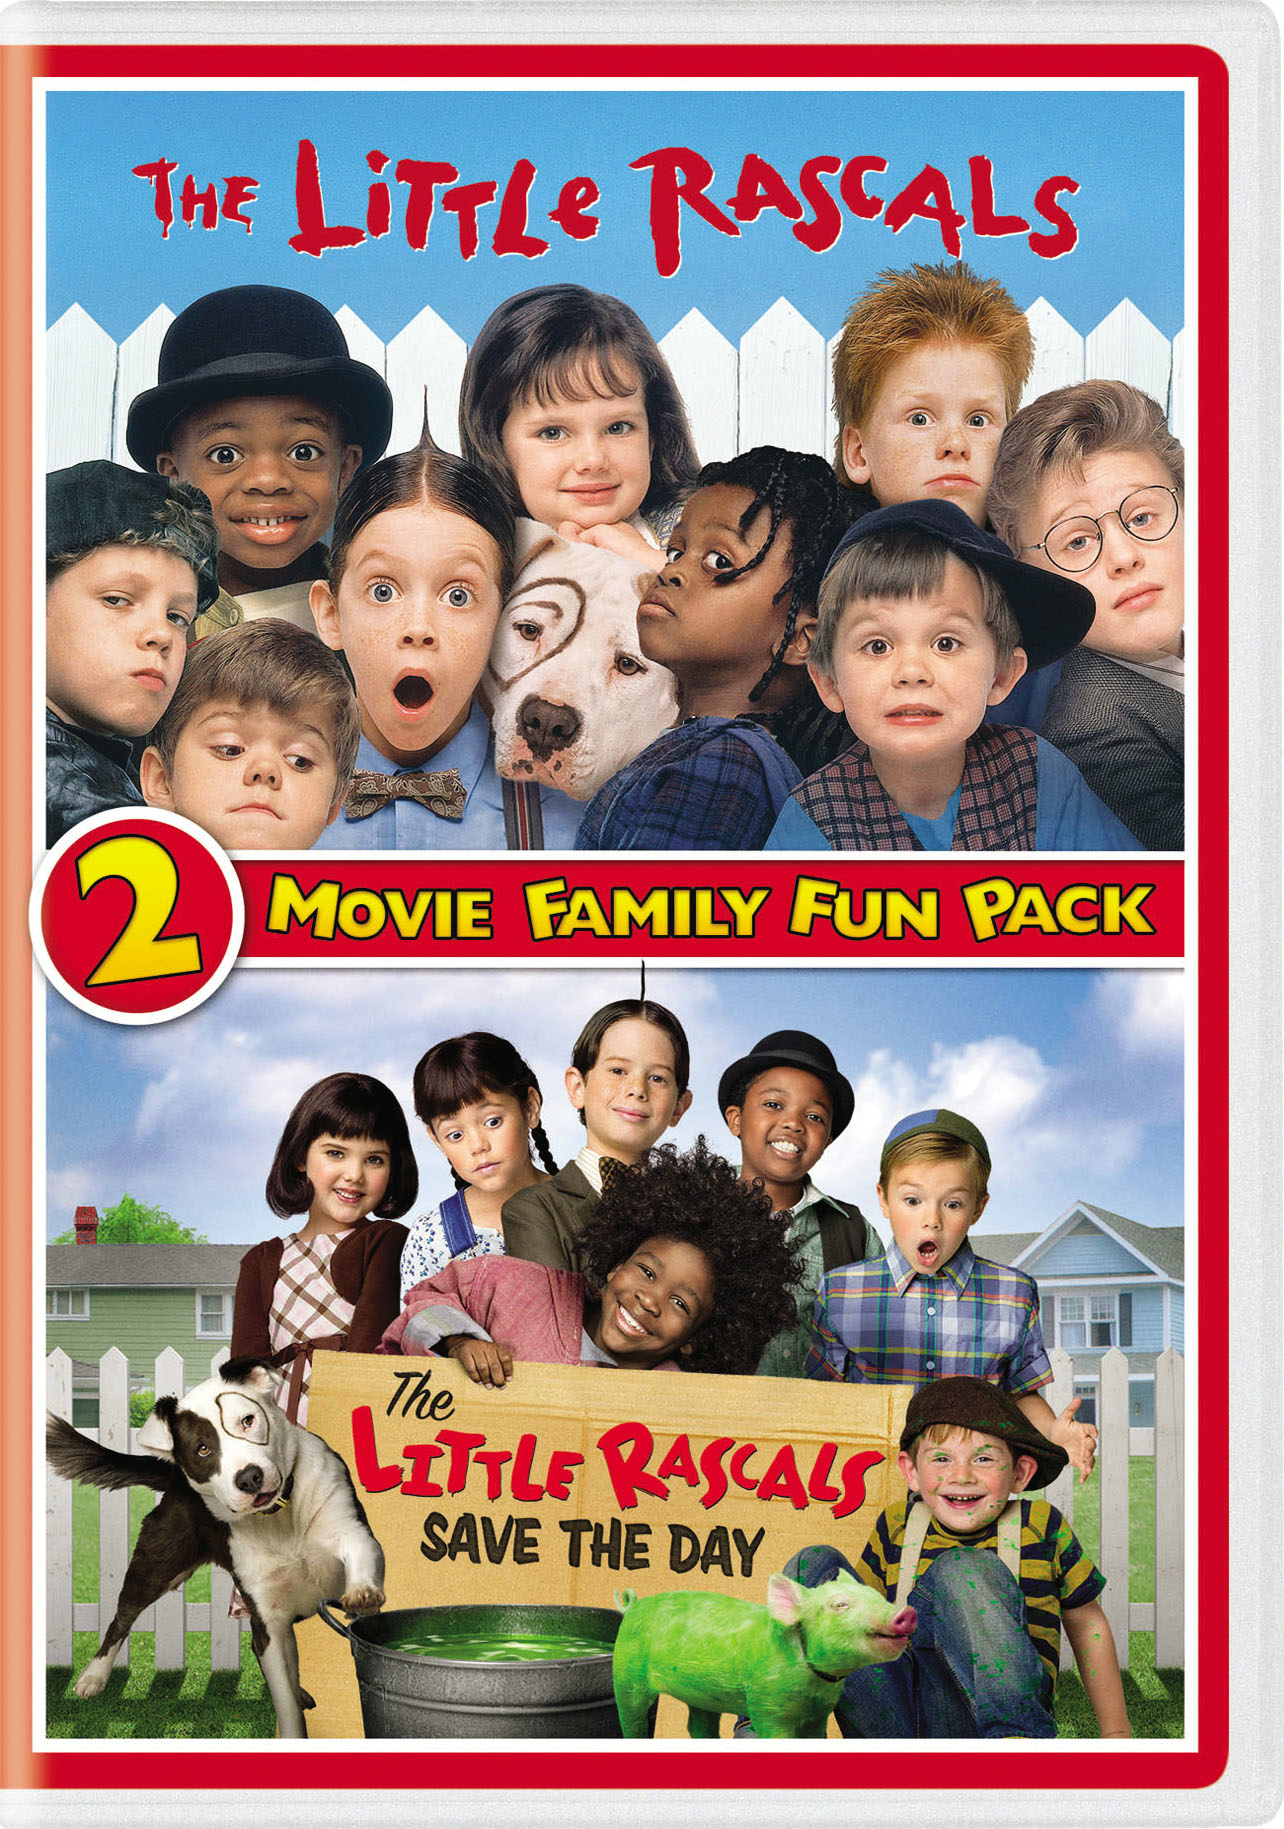 The Little Rascals/The Little Rascals Save The Day (DVD Double Feature) - DVD [ 2014 ]  - Comedy Movies On DVD - Movies On GRUV